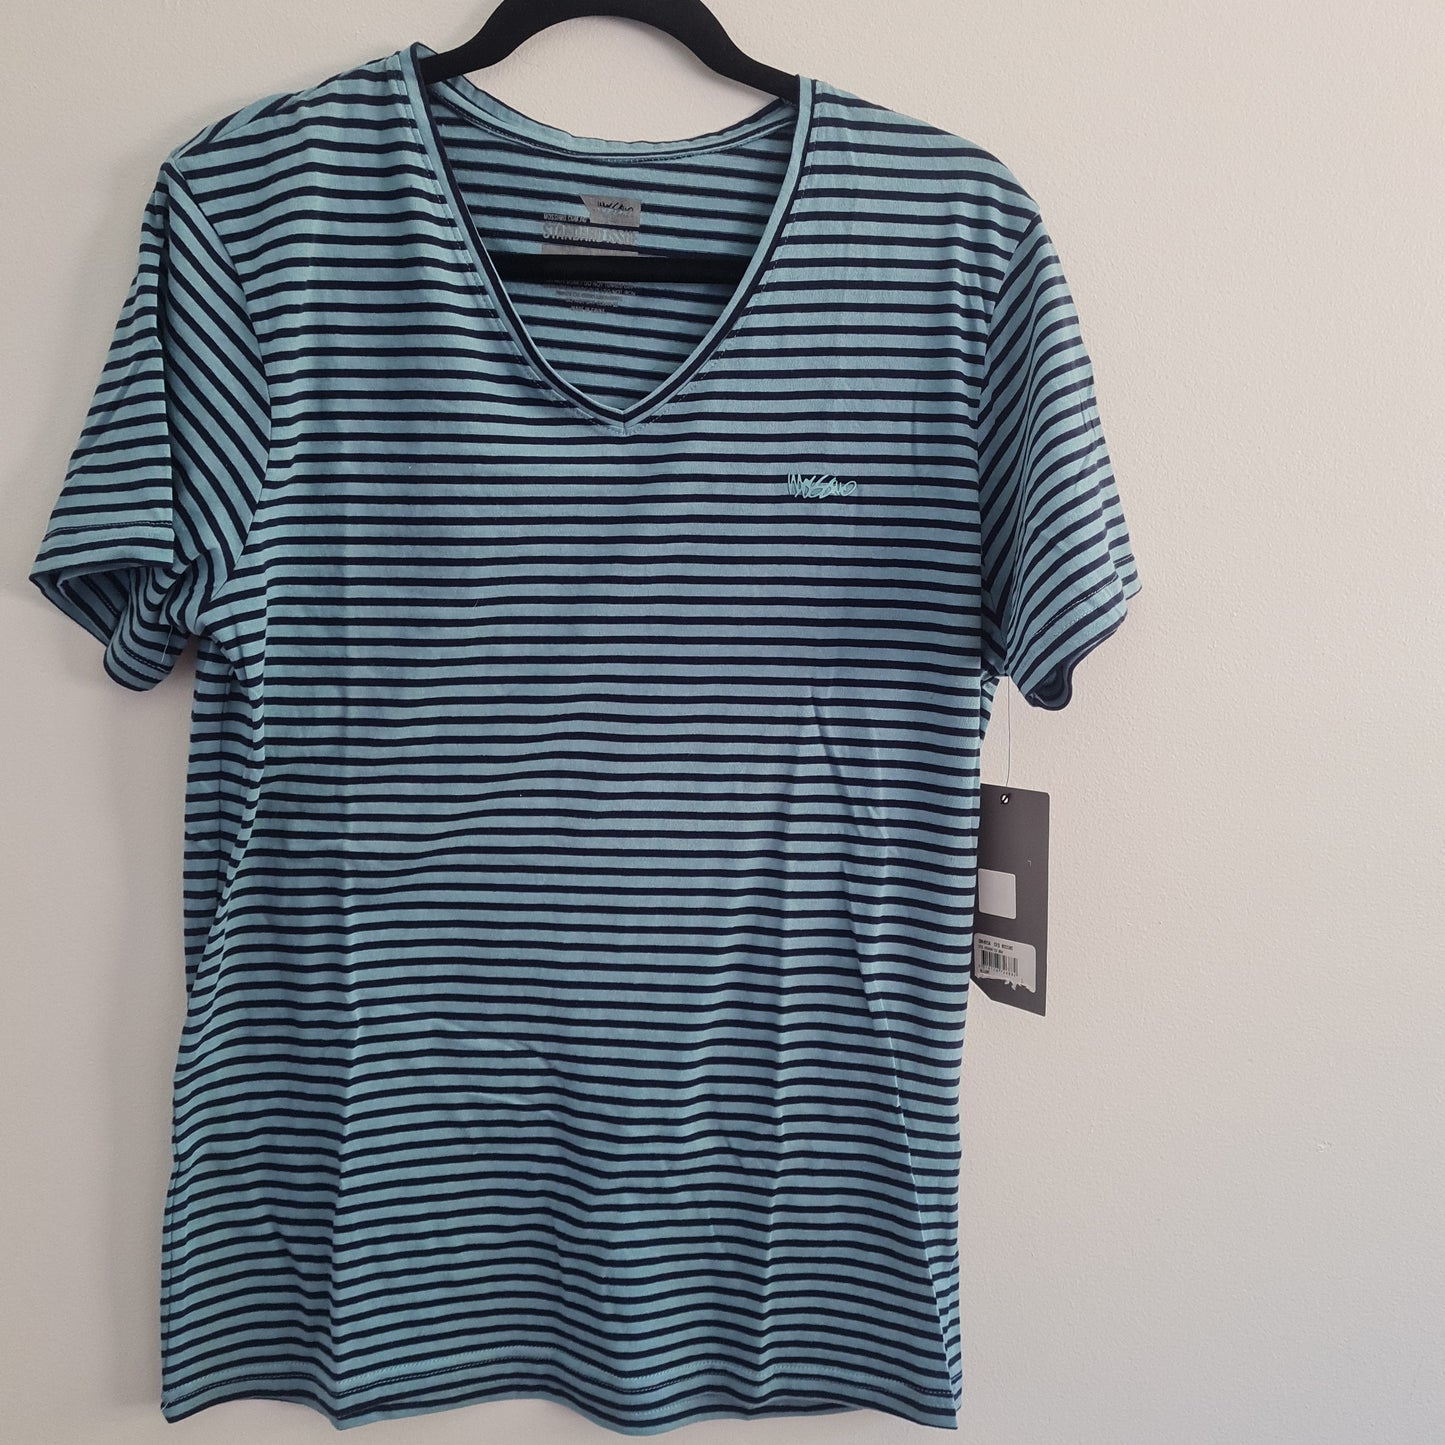 Mossimo Blue striped T-Shirt Size L